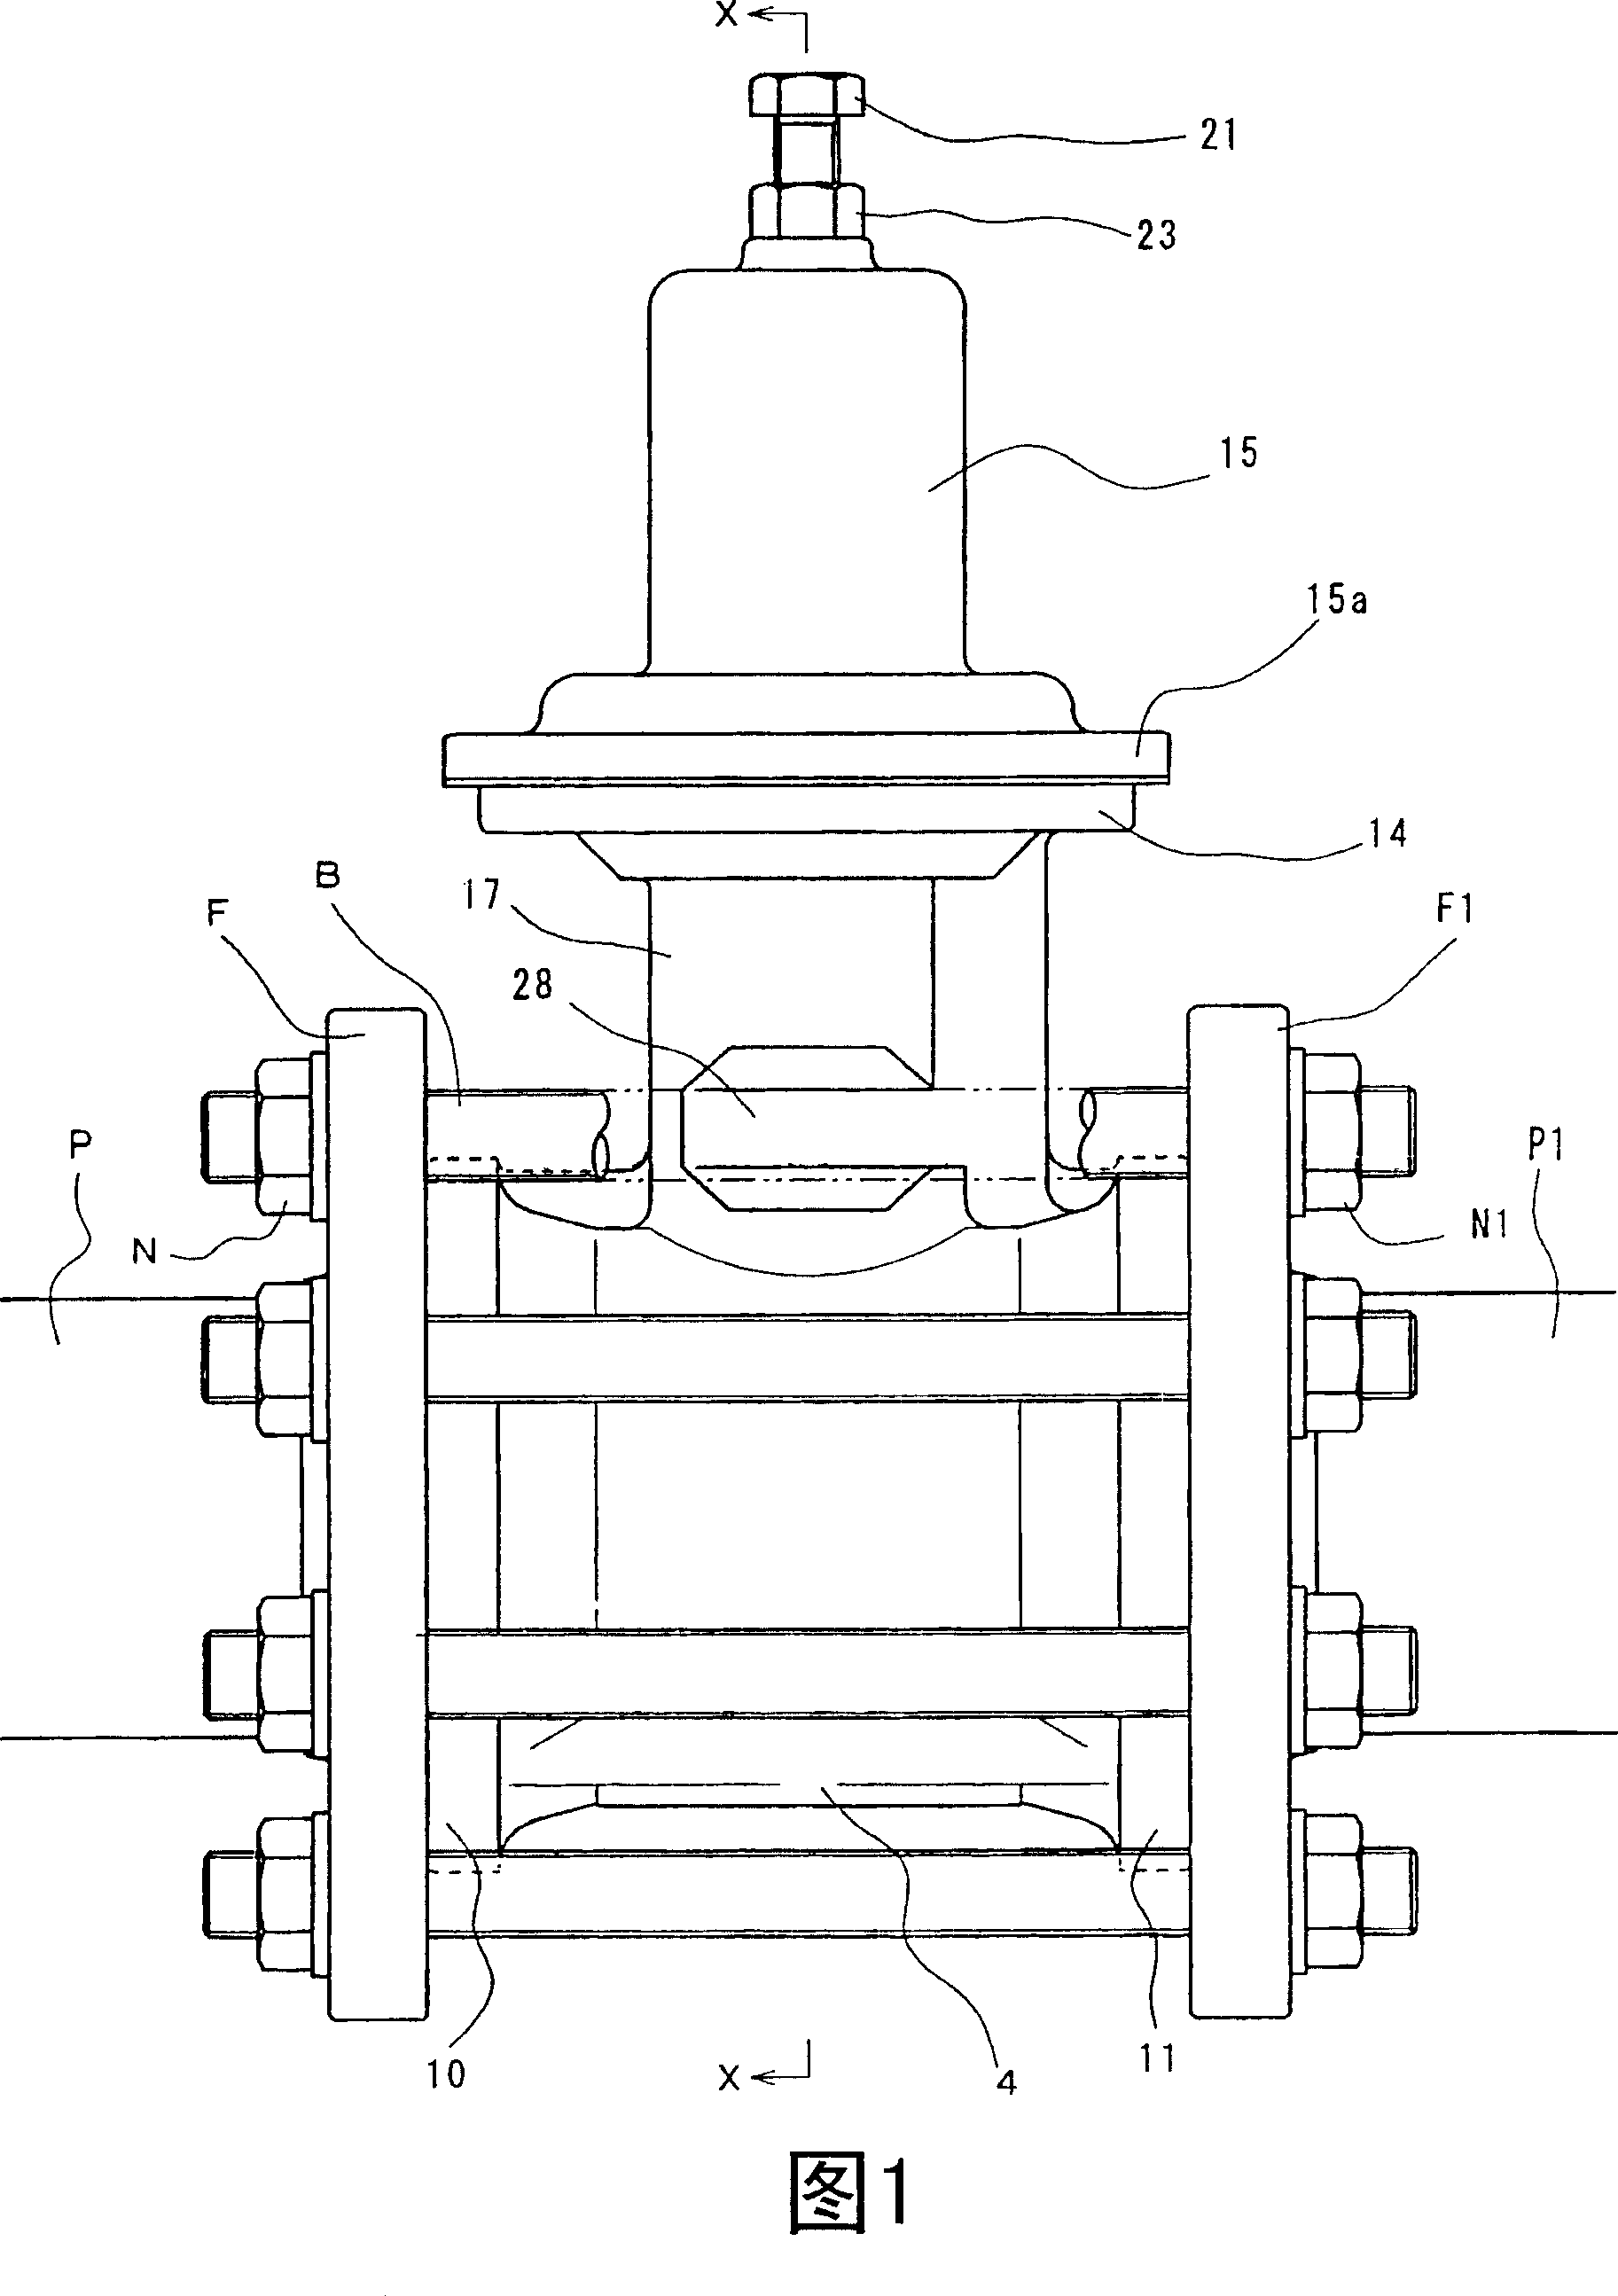 Oppositely clamped type direct-acting valve